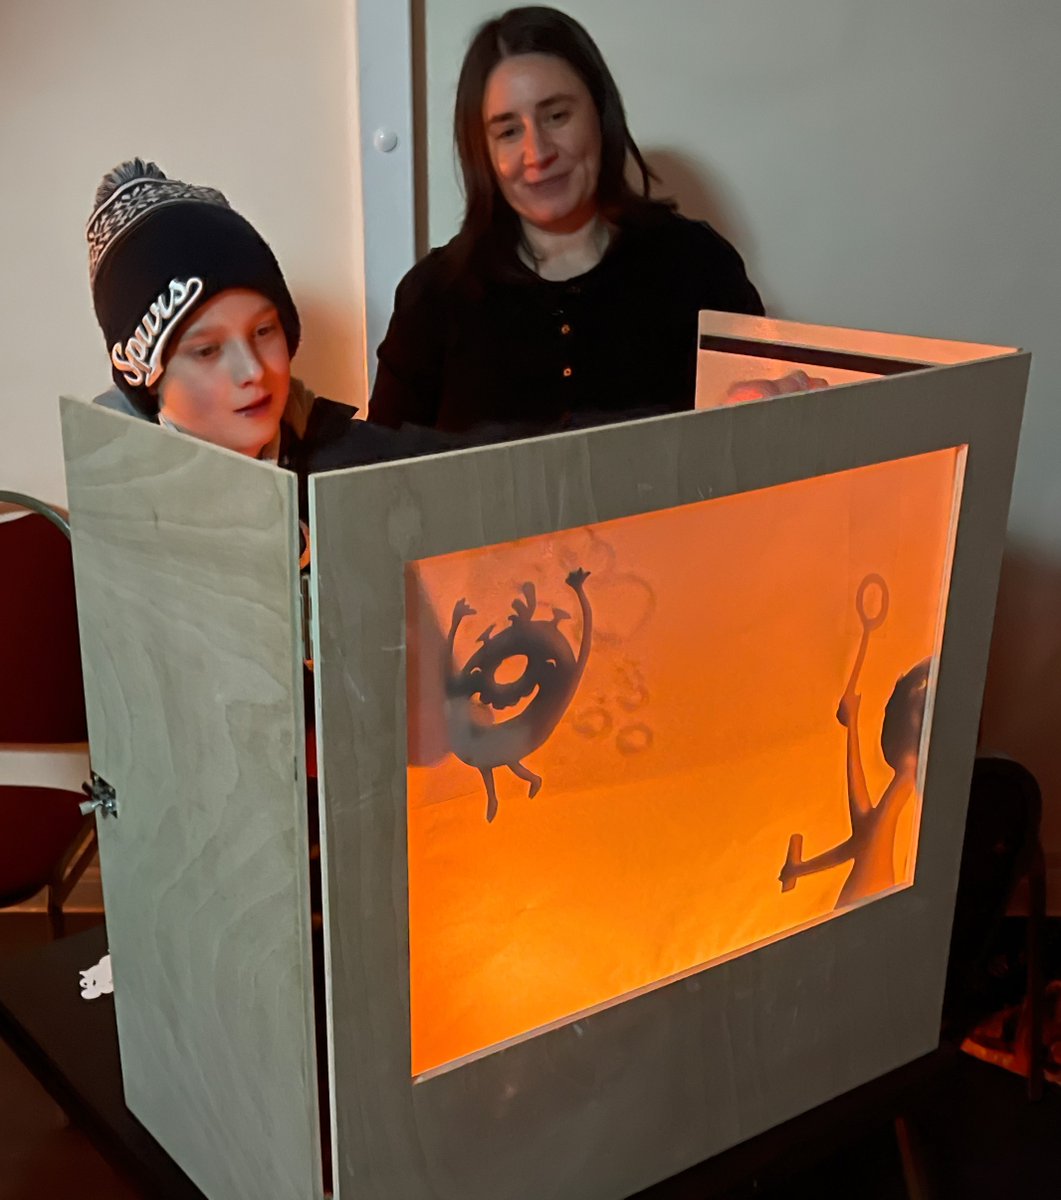 Playing with my new shadow puppet theatre at last week's #DarkSkies event @HertfordTC. With thanks to @lapdSimon for building the theatre and to Steve Heliczer from @HertfordAstro for the photo. But do you recognise the book @maverickbooks?